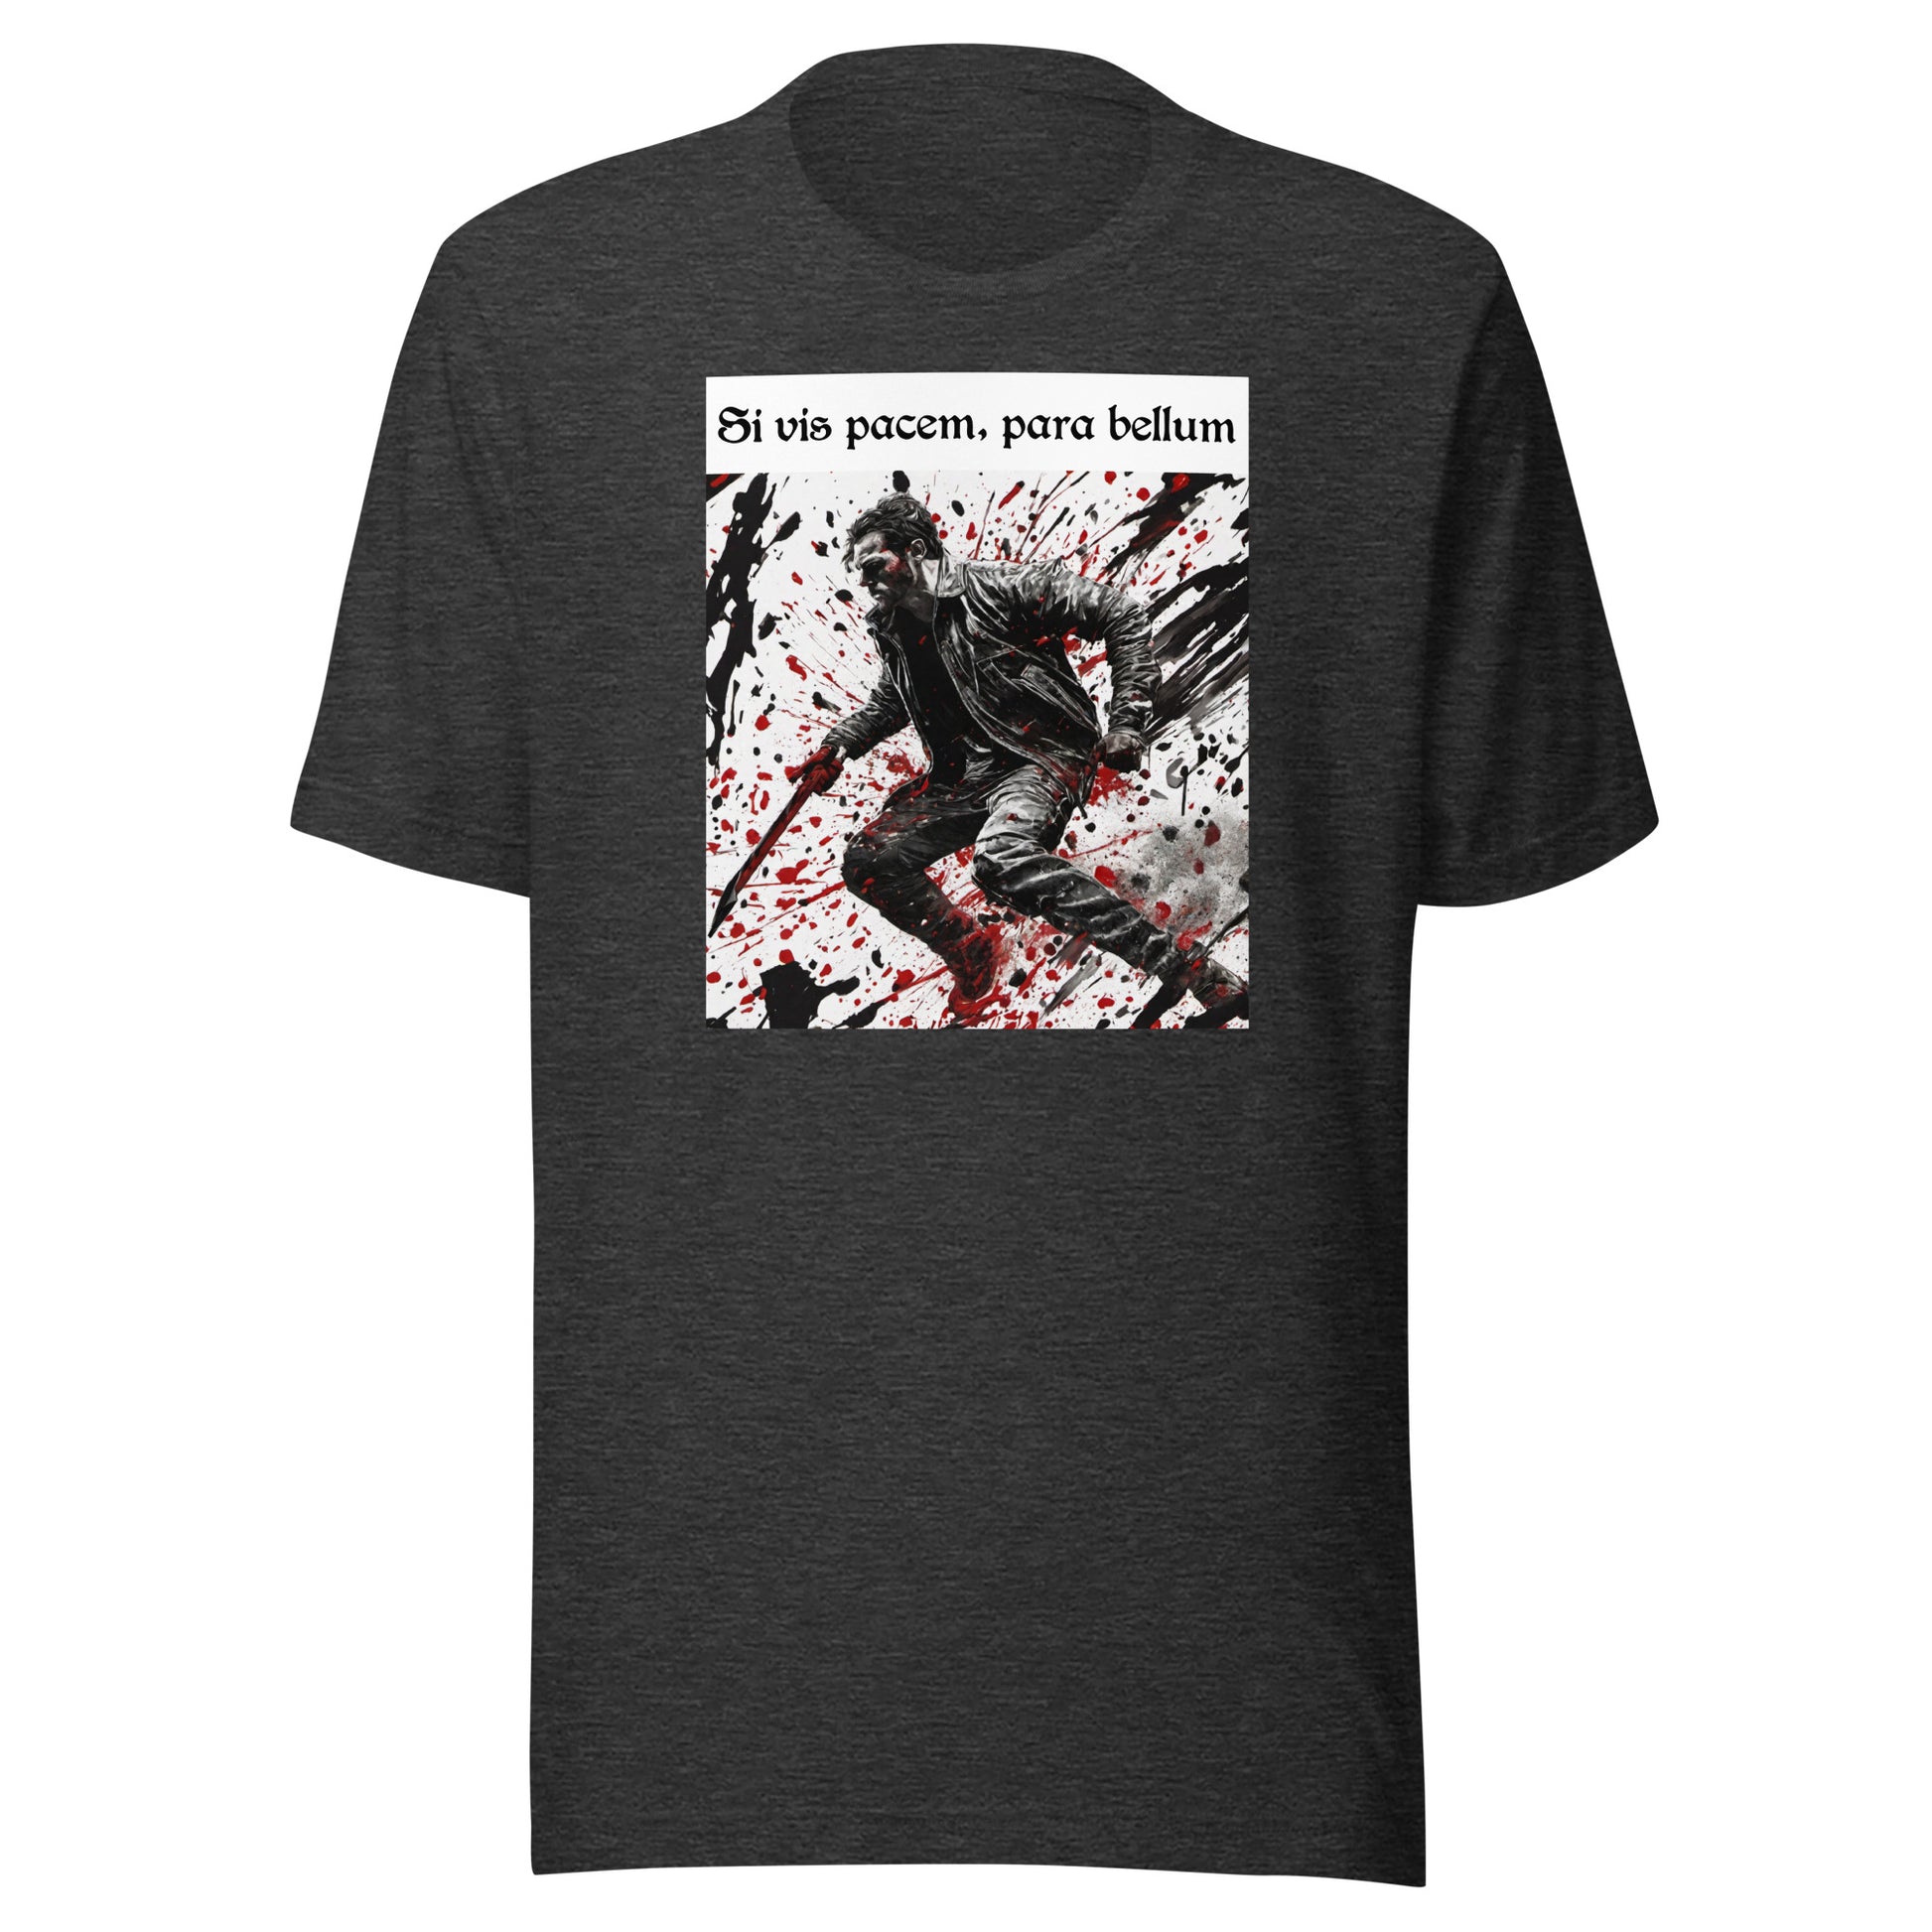 If You Want Peace, Prepare for War Men's Graphic T-Shirt Dark Grey Heather